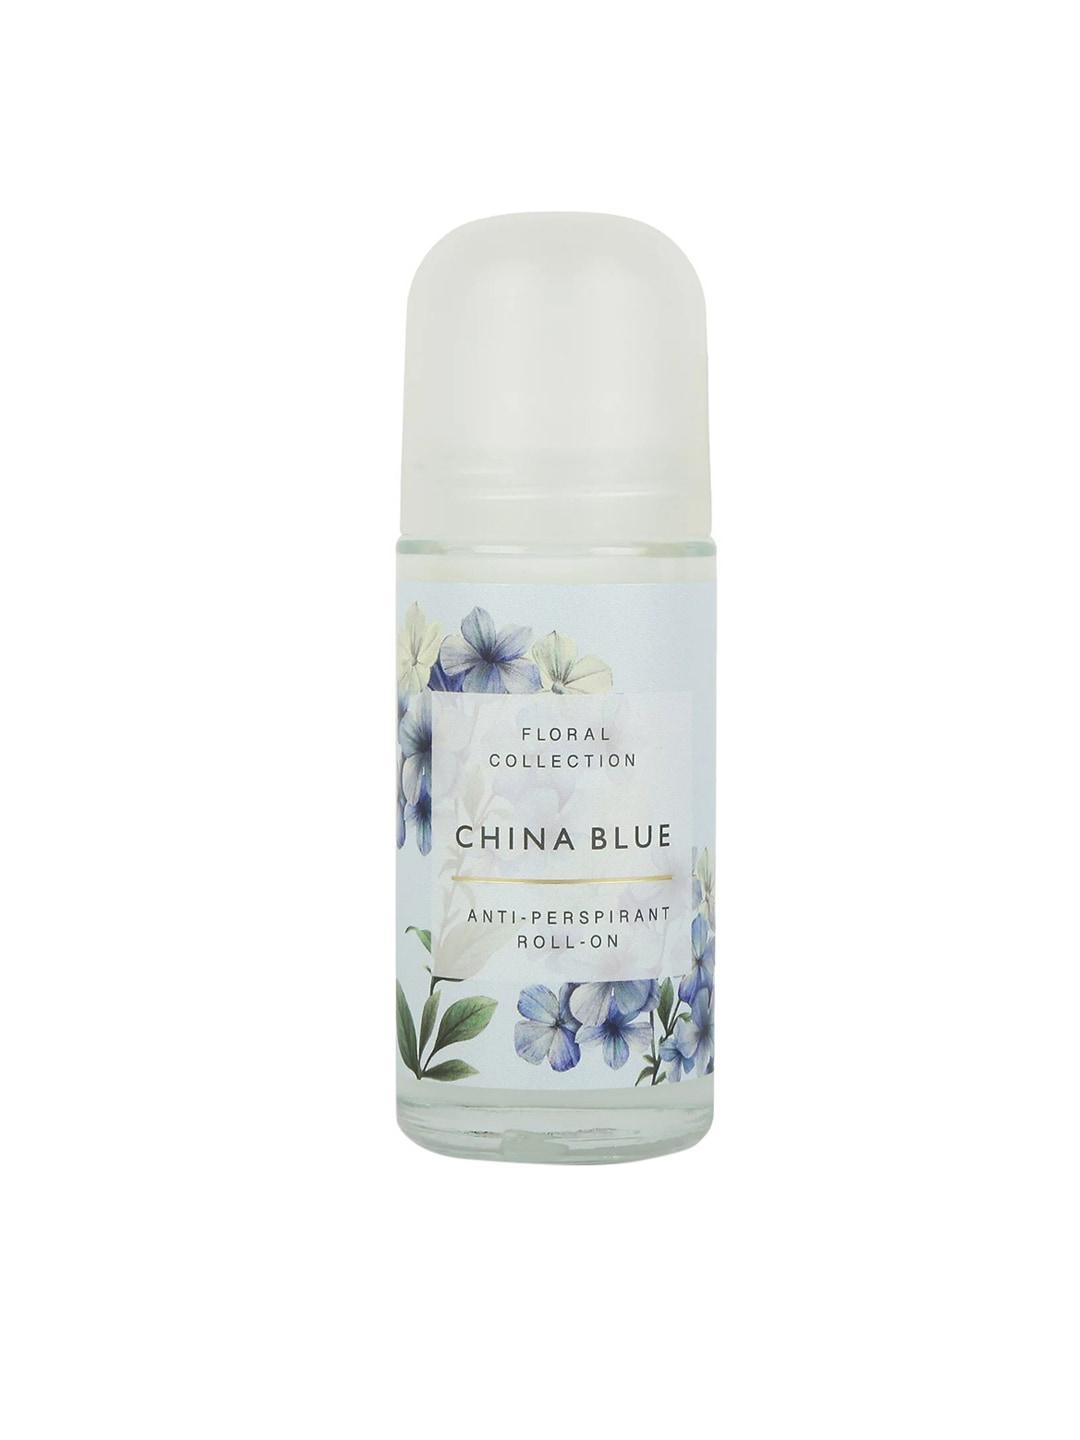 marks-&-spencer-china-blue-anti-perspirant-roll-on-50ml